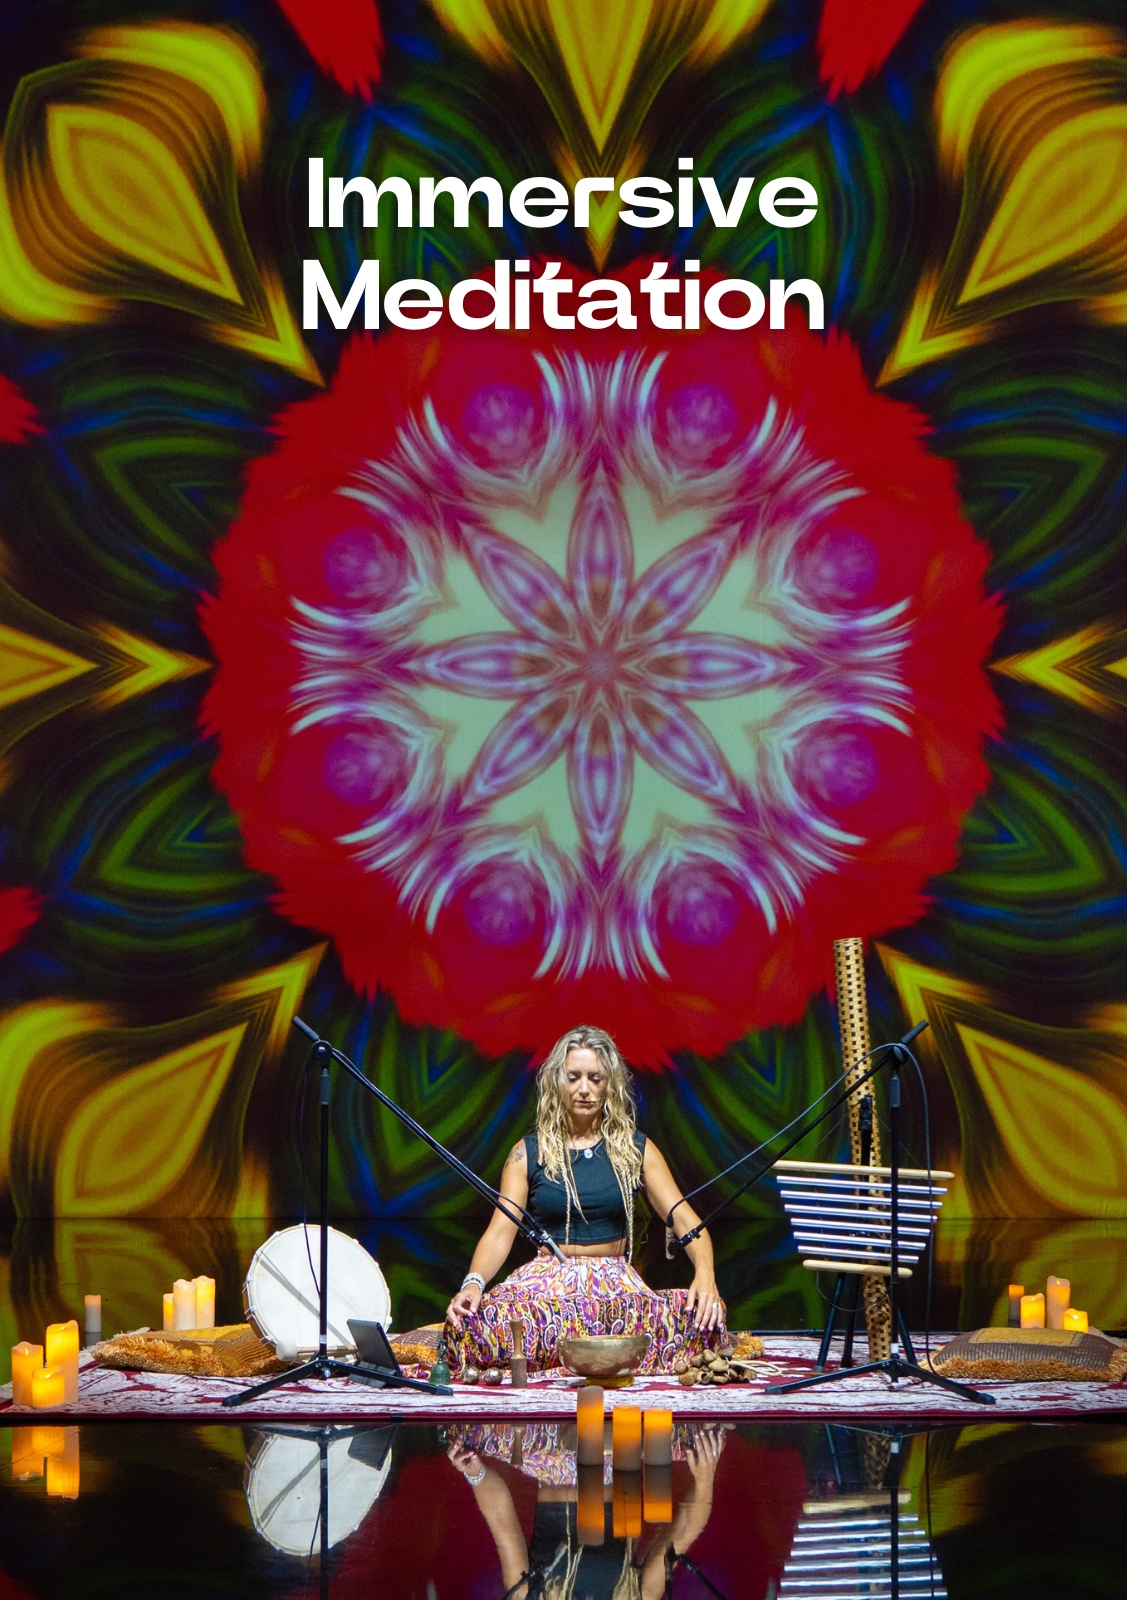 Immersive MeditationWork on your Mindfulness, step by step, and enjoy a stunning 360° space-themed show along the way.